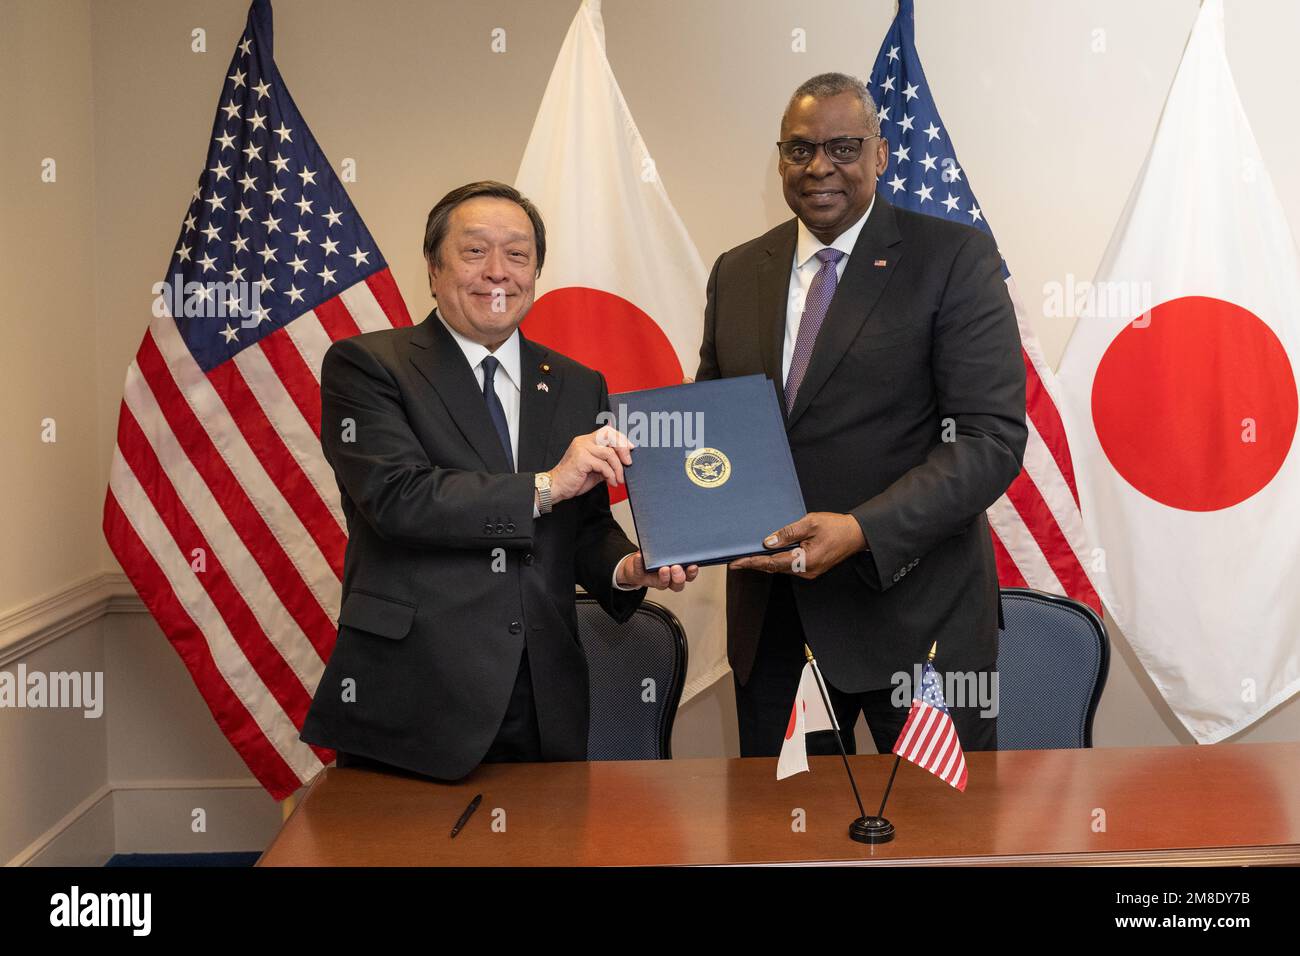 Washington, United States Of America. 12th Jan, 2023. Washington, United States of America. 12 January, 2023. U.S Secretary of Defense Lloyd Austin, right, and Japanese Defense Minister Yasukazu Hamada hold up their signed agreement following bilateral discussions at the Pentagon, January 12, 2023 in Washington, DC Credit: TSgt. Jack Sanders/DOD Photo/Alamy Live News Stock Photo